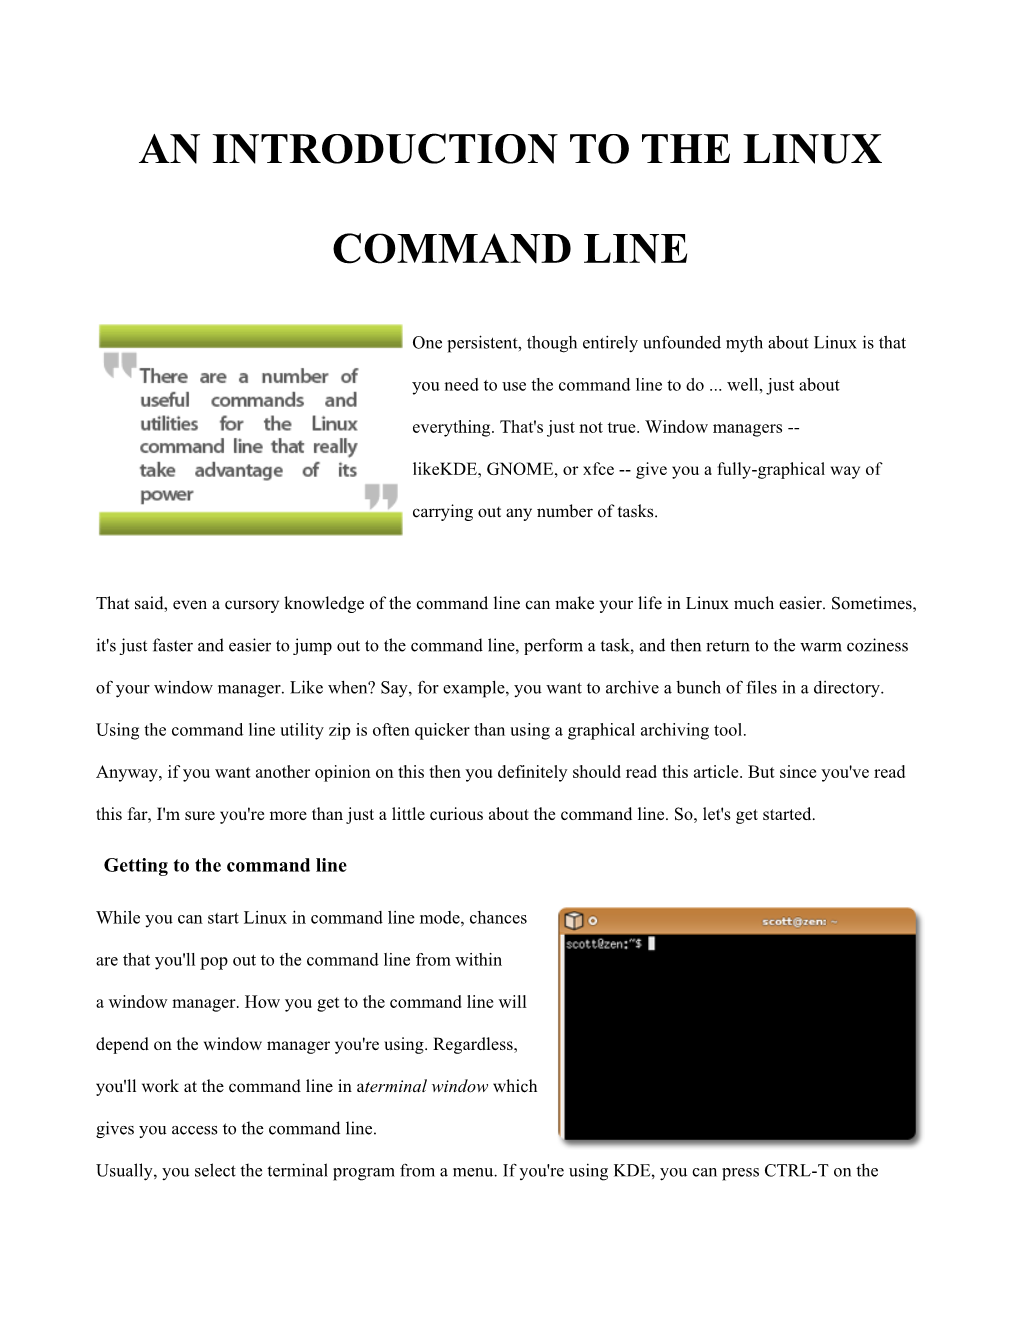 An Introduction to the Linux Command Line